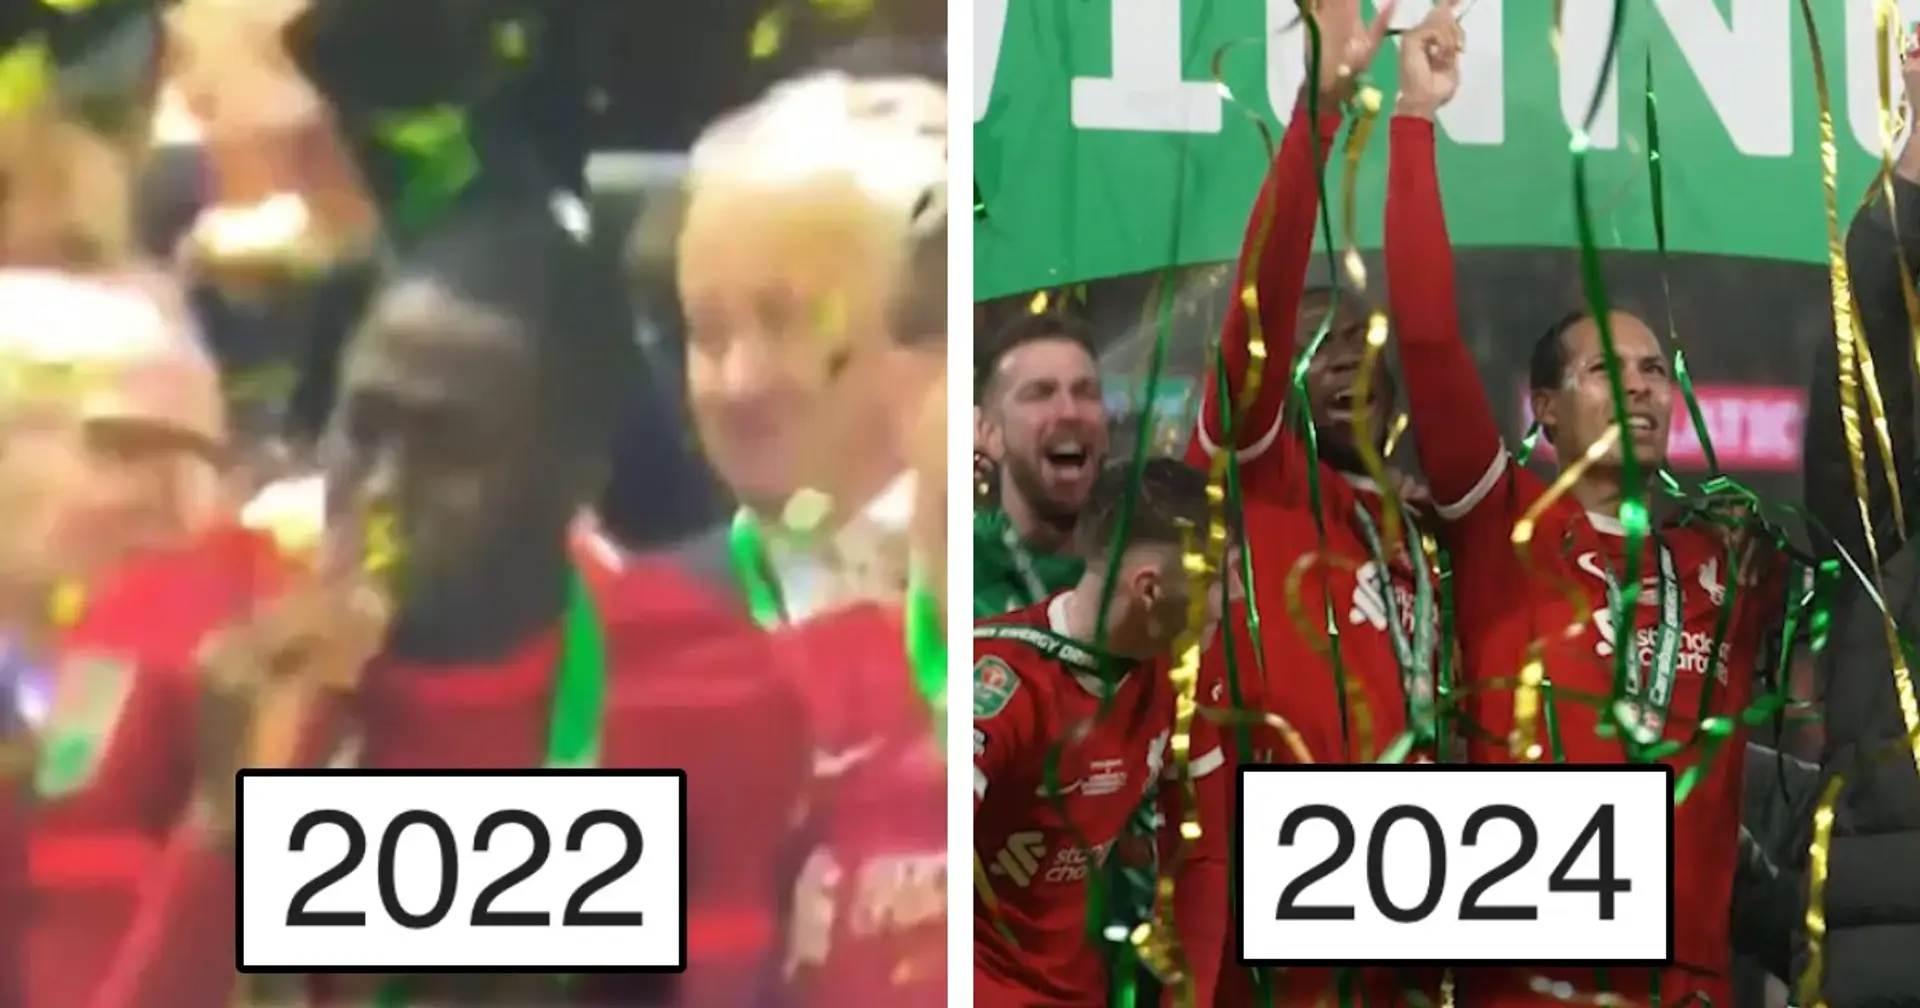 Spotted: Konate nearly chokes on confetti AGAIN during Carabao Cup celebrations (video)